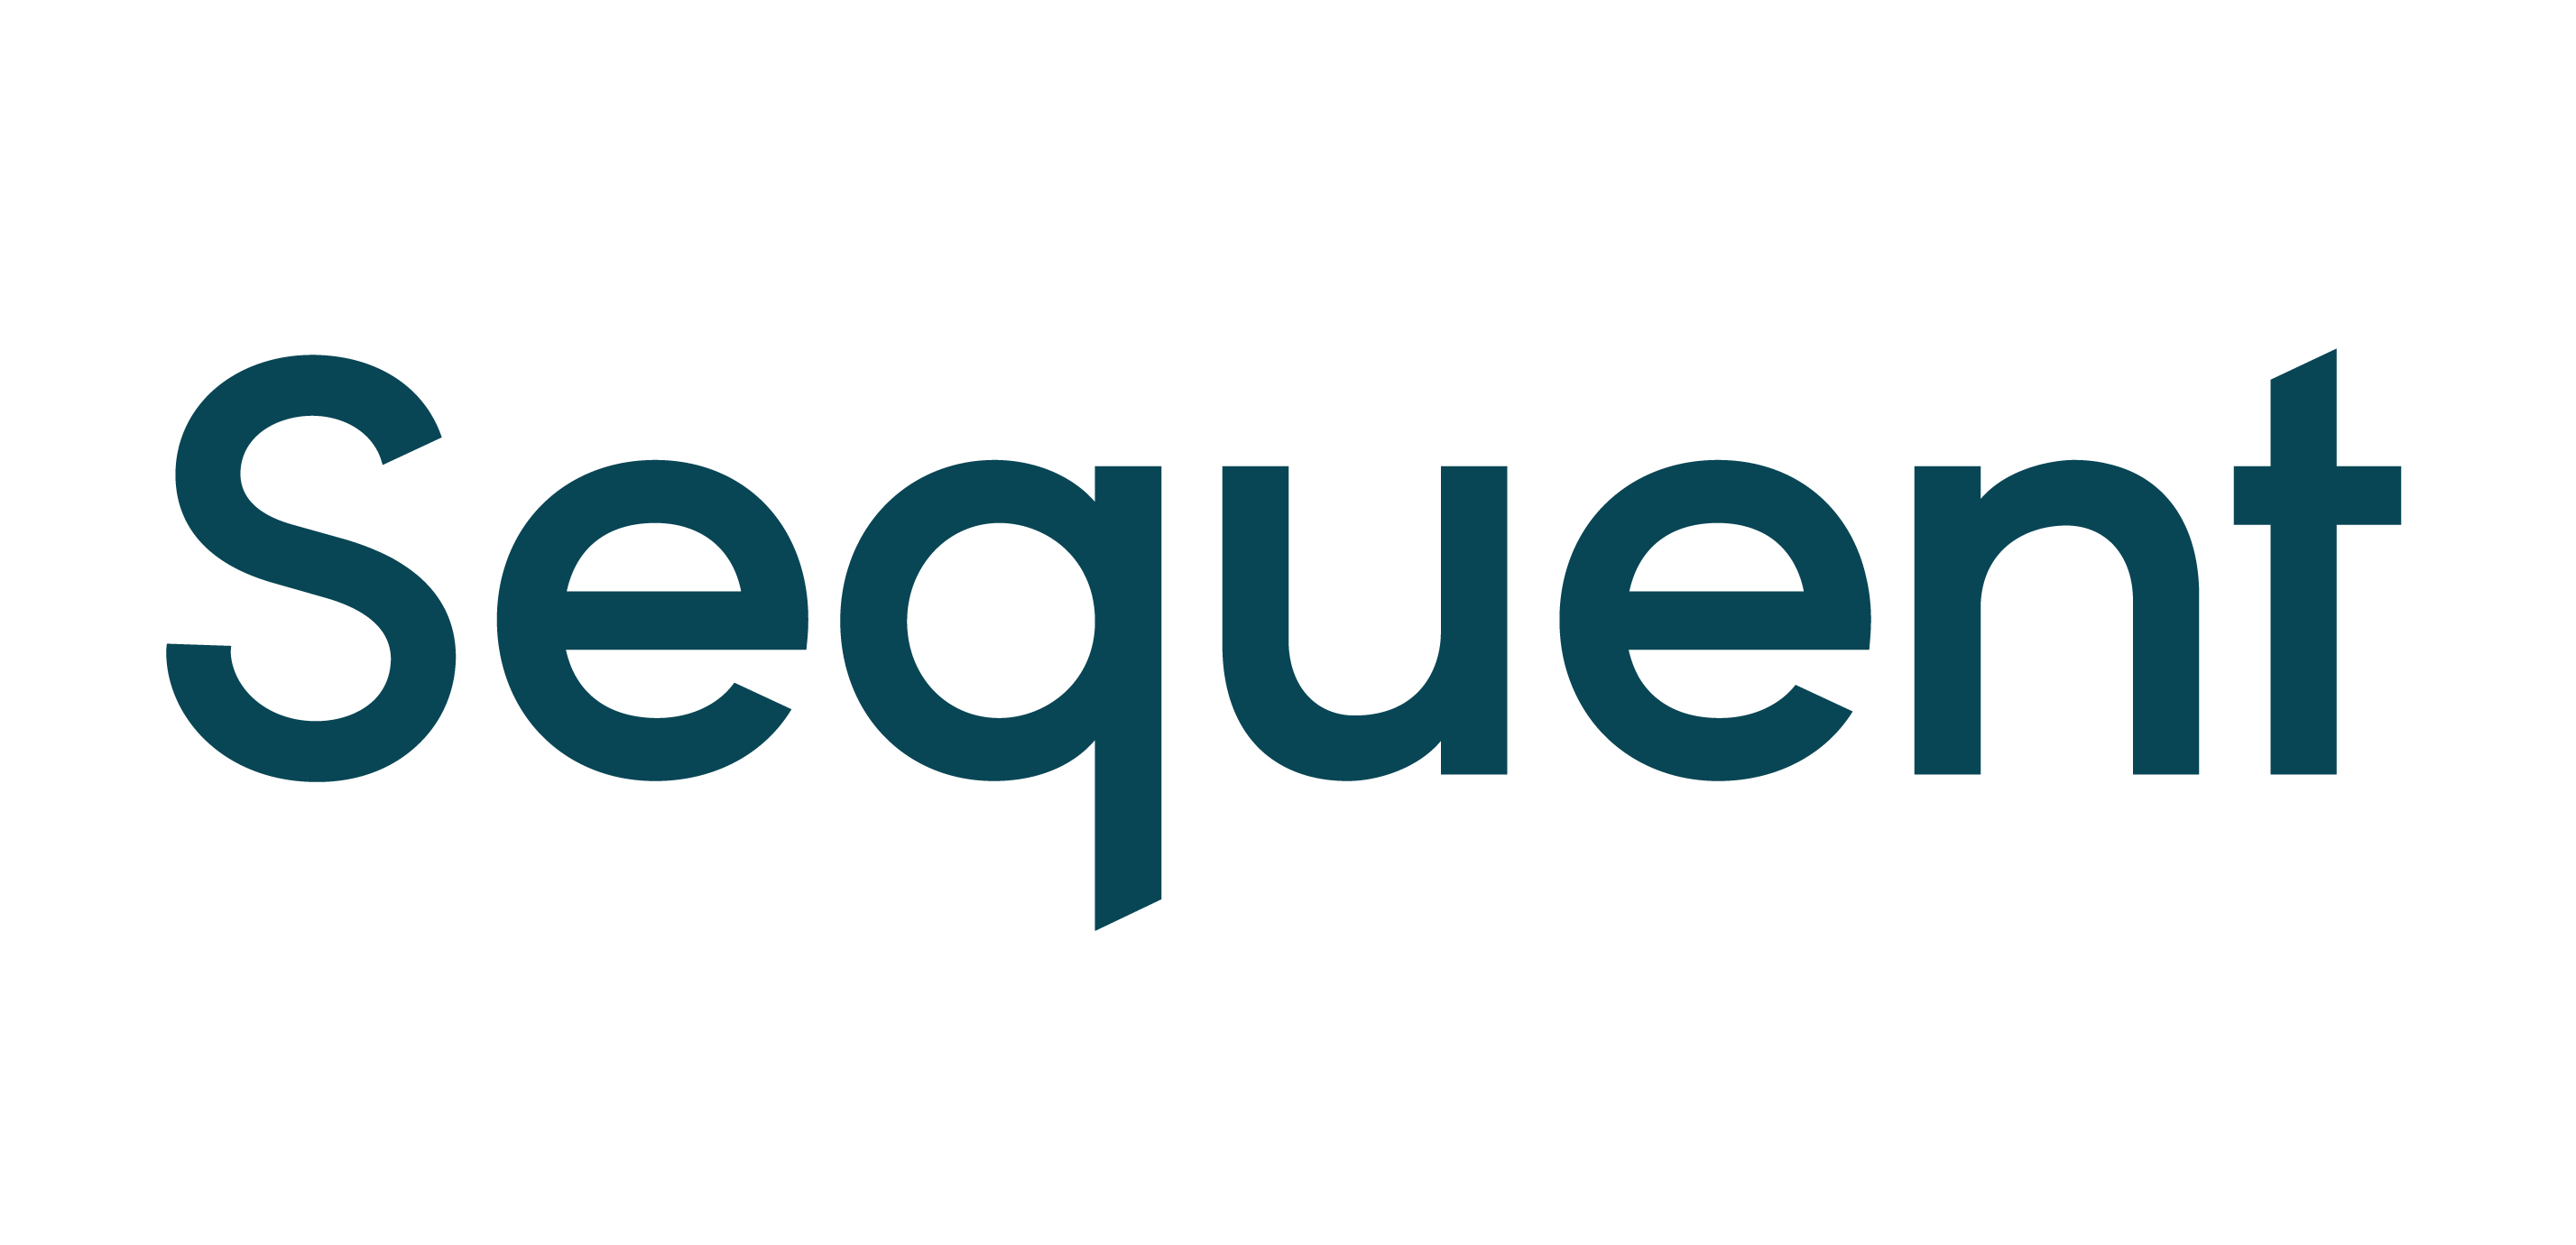 Sequent Guernsey Limited